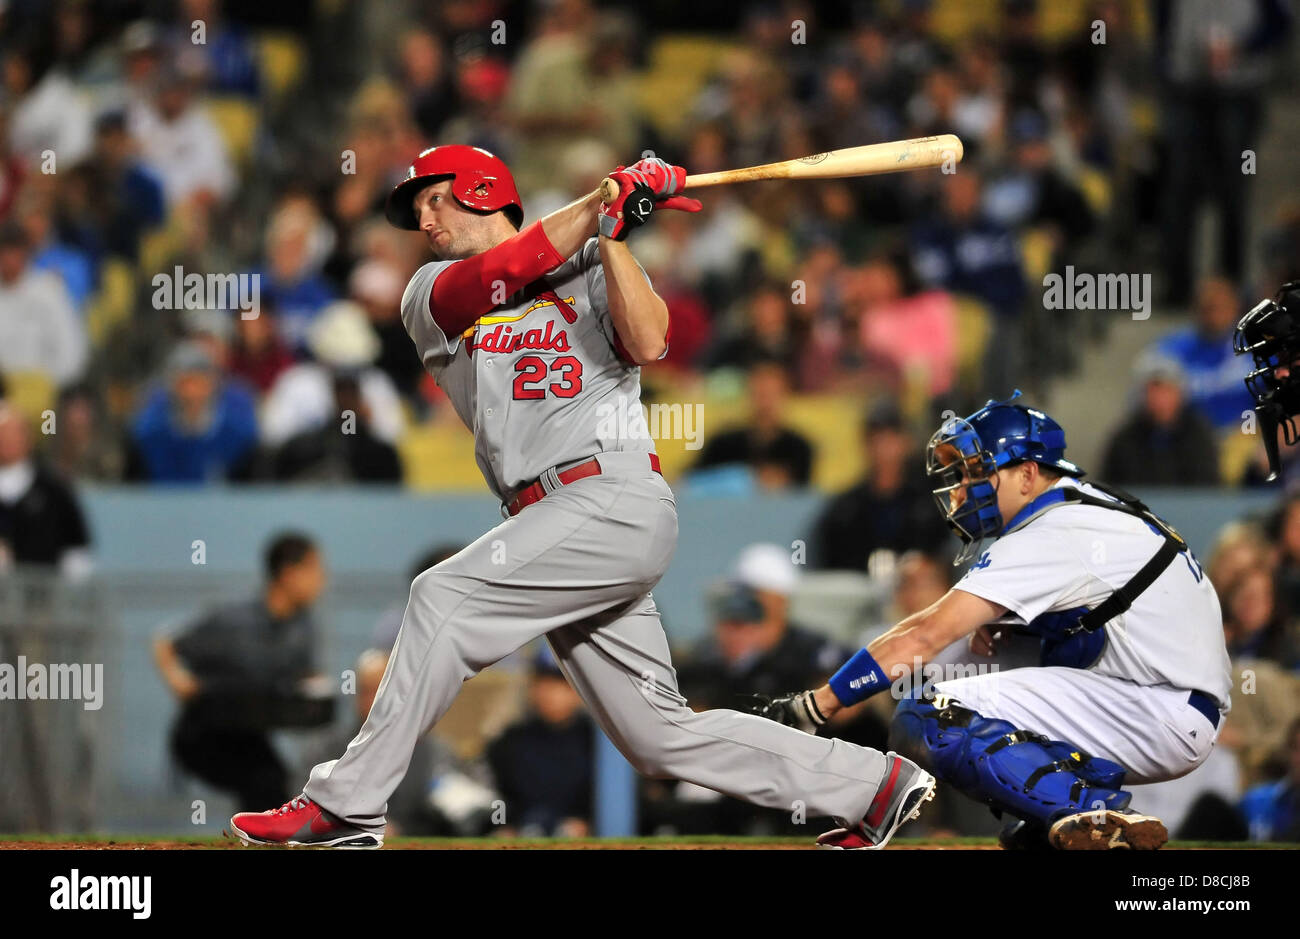 Freese's 4 RBIs help Cardinals force Game 5